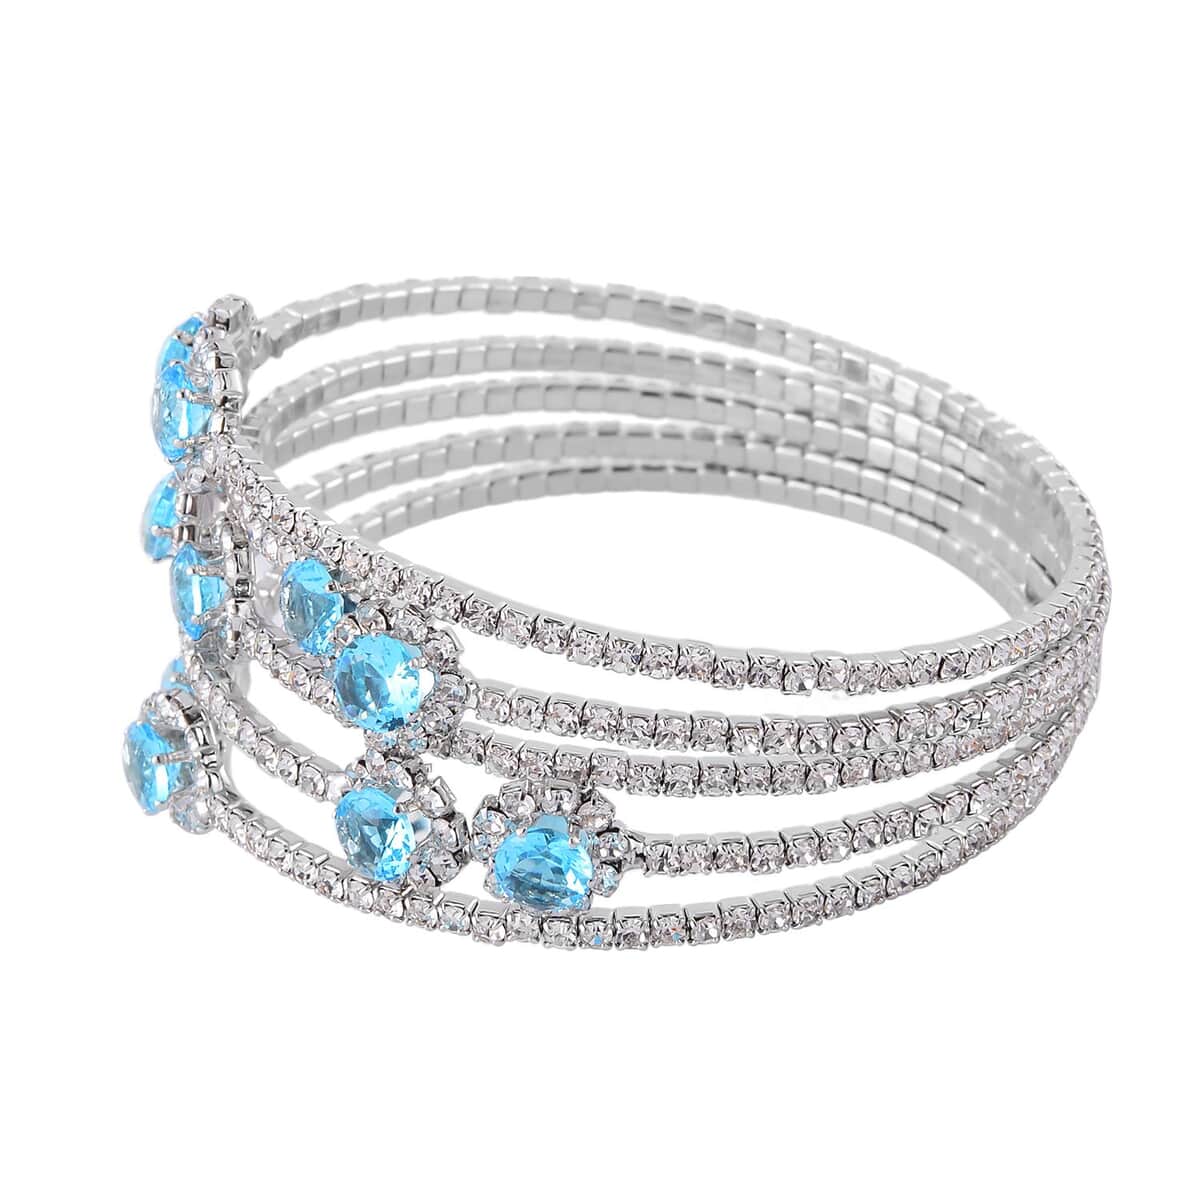 Sky Blue and White Color Austrian Crystal Bangle Bracelet (7-7.5 In) and Earrings in Silvertone image number 3